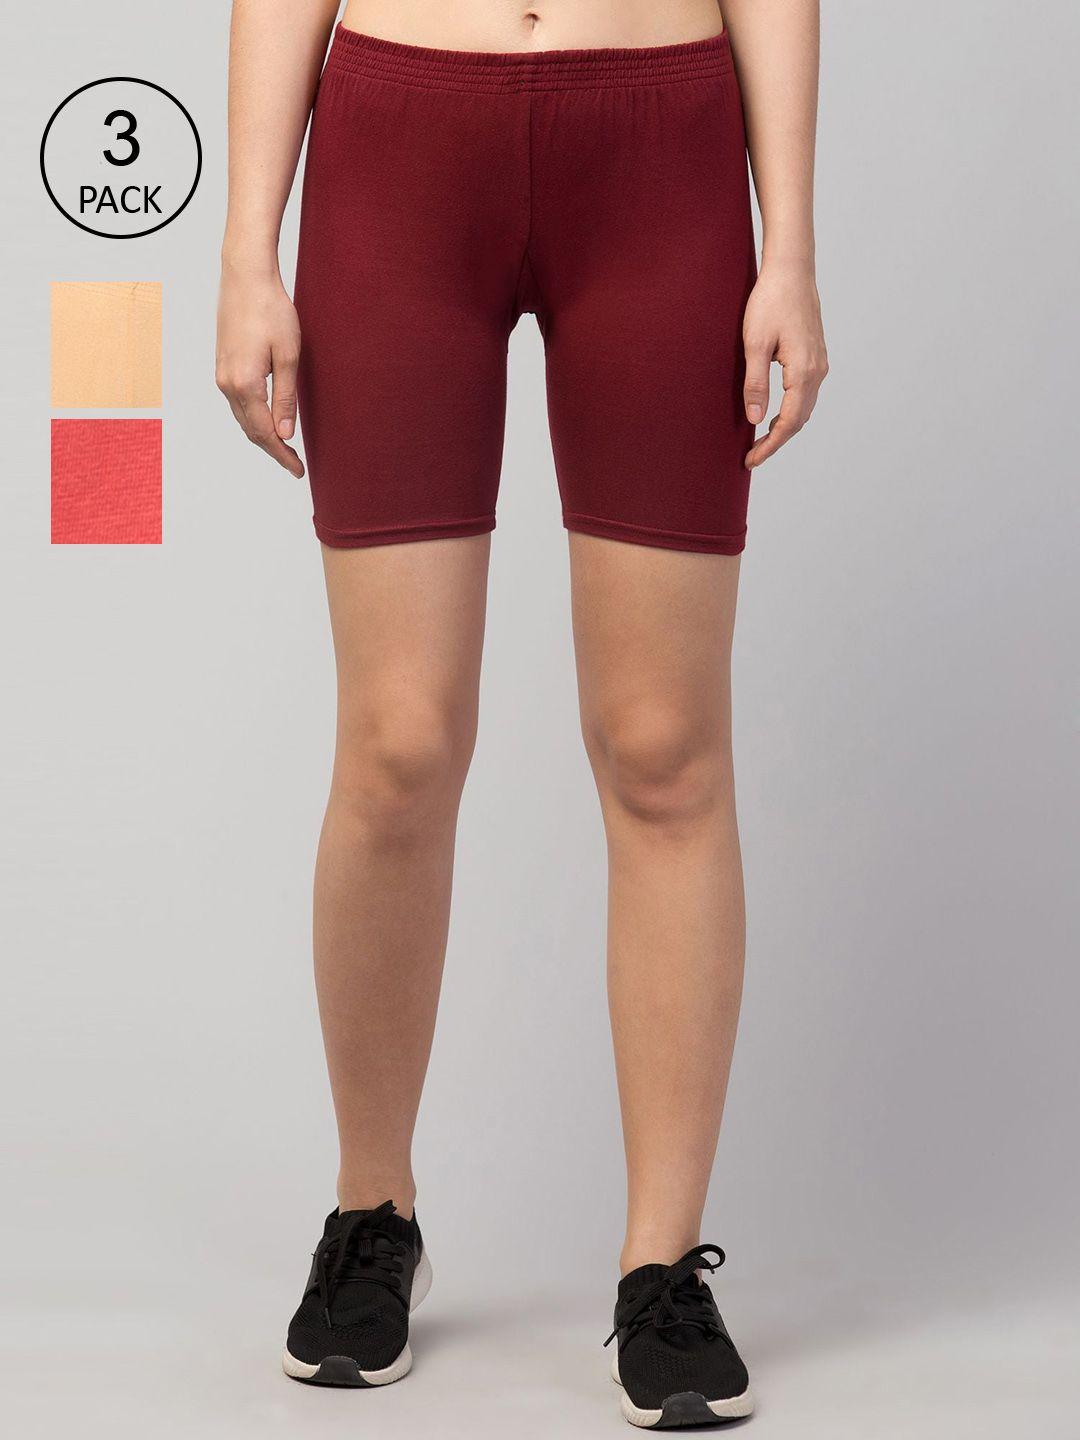 apraa & parma women set of 3 maroon peach & coral slim fit cycling sports shorts